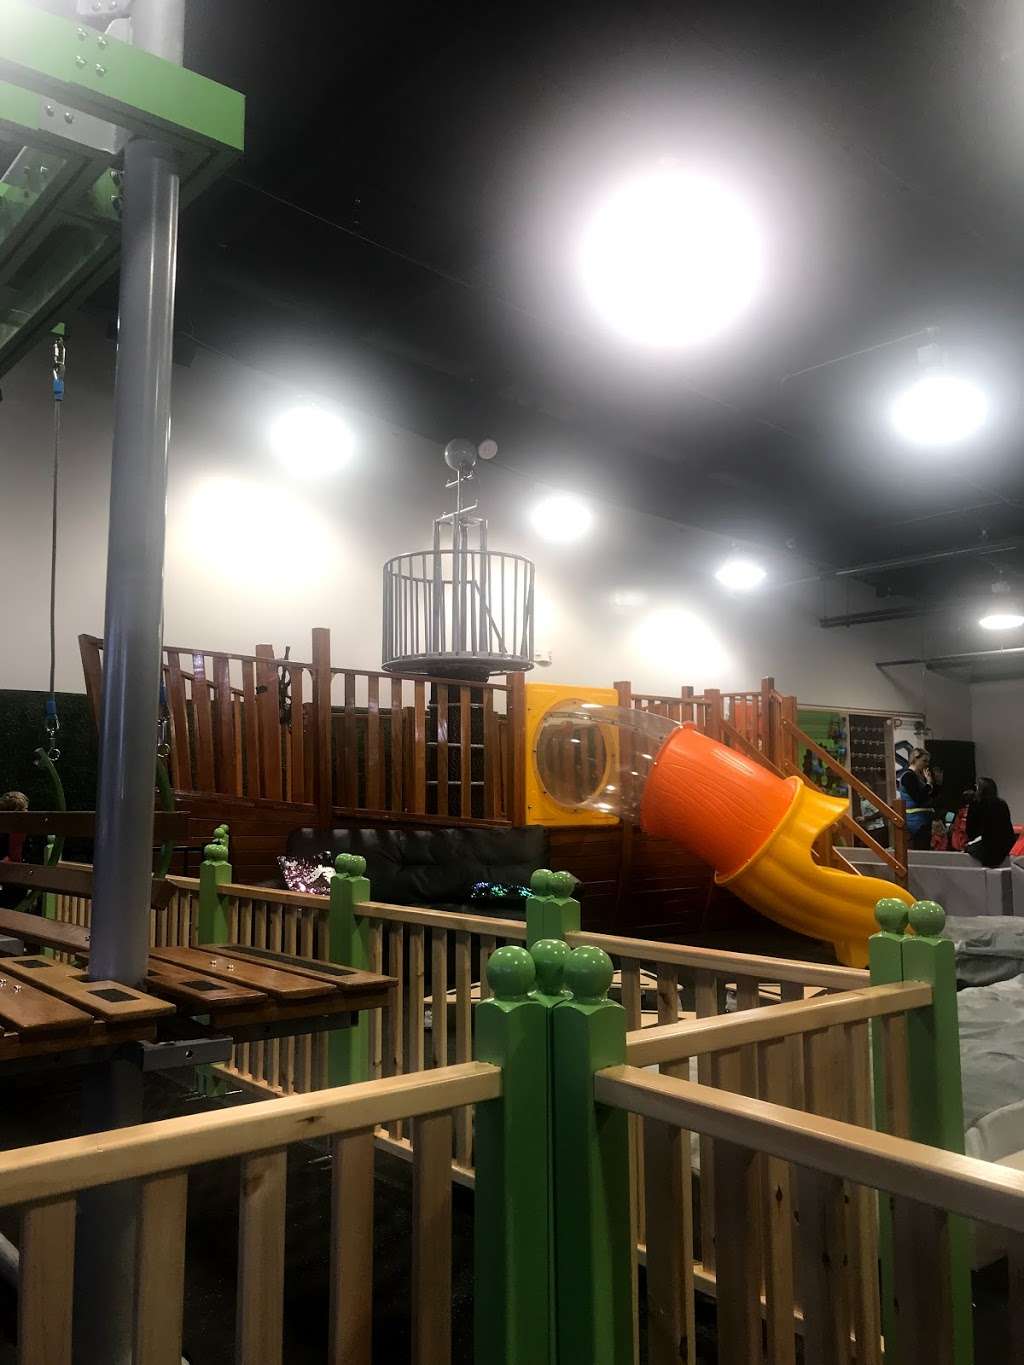 Little Land Play Gym & Pediatric Therapy - Katy | 610 Katy Fort Bend Rd Suite 270, Katy, TX 77494 | Phone: (281) 786-4899